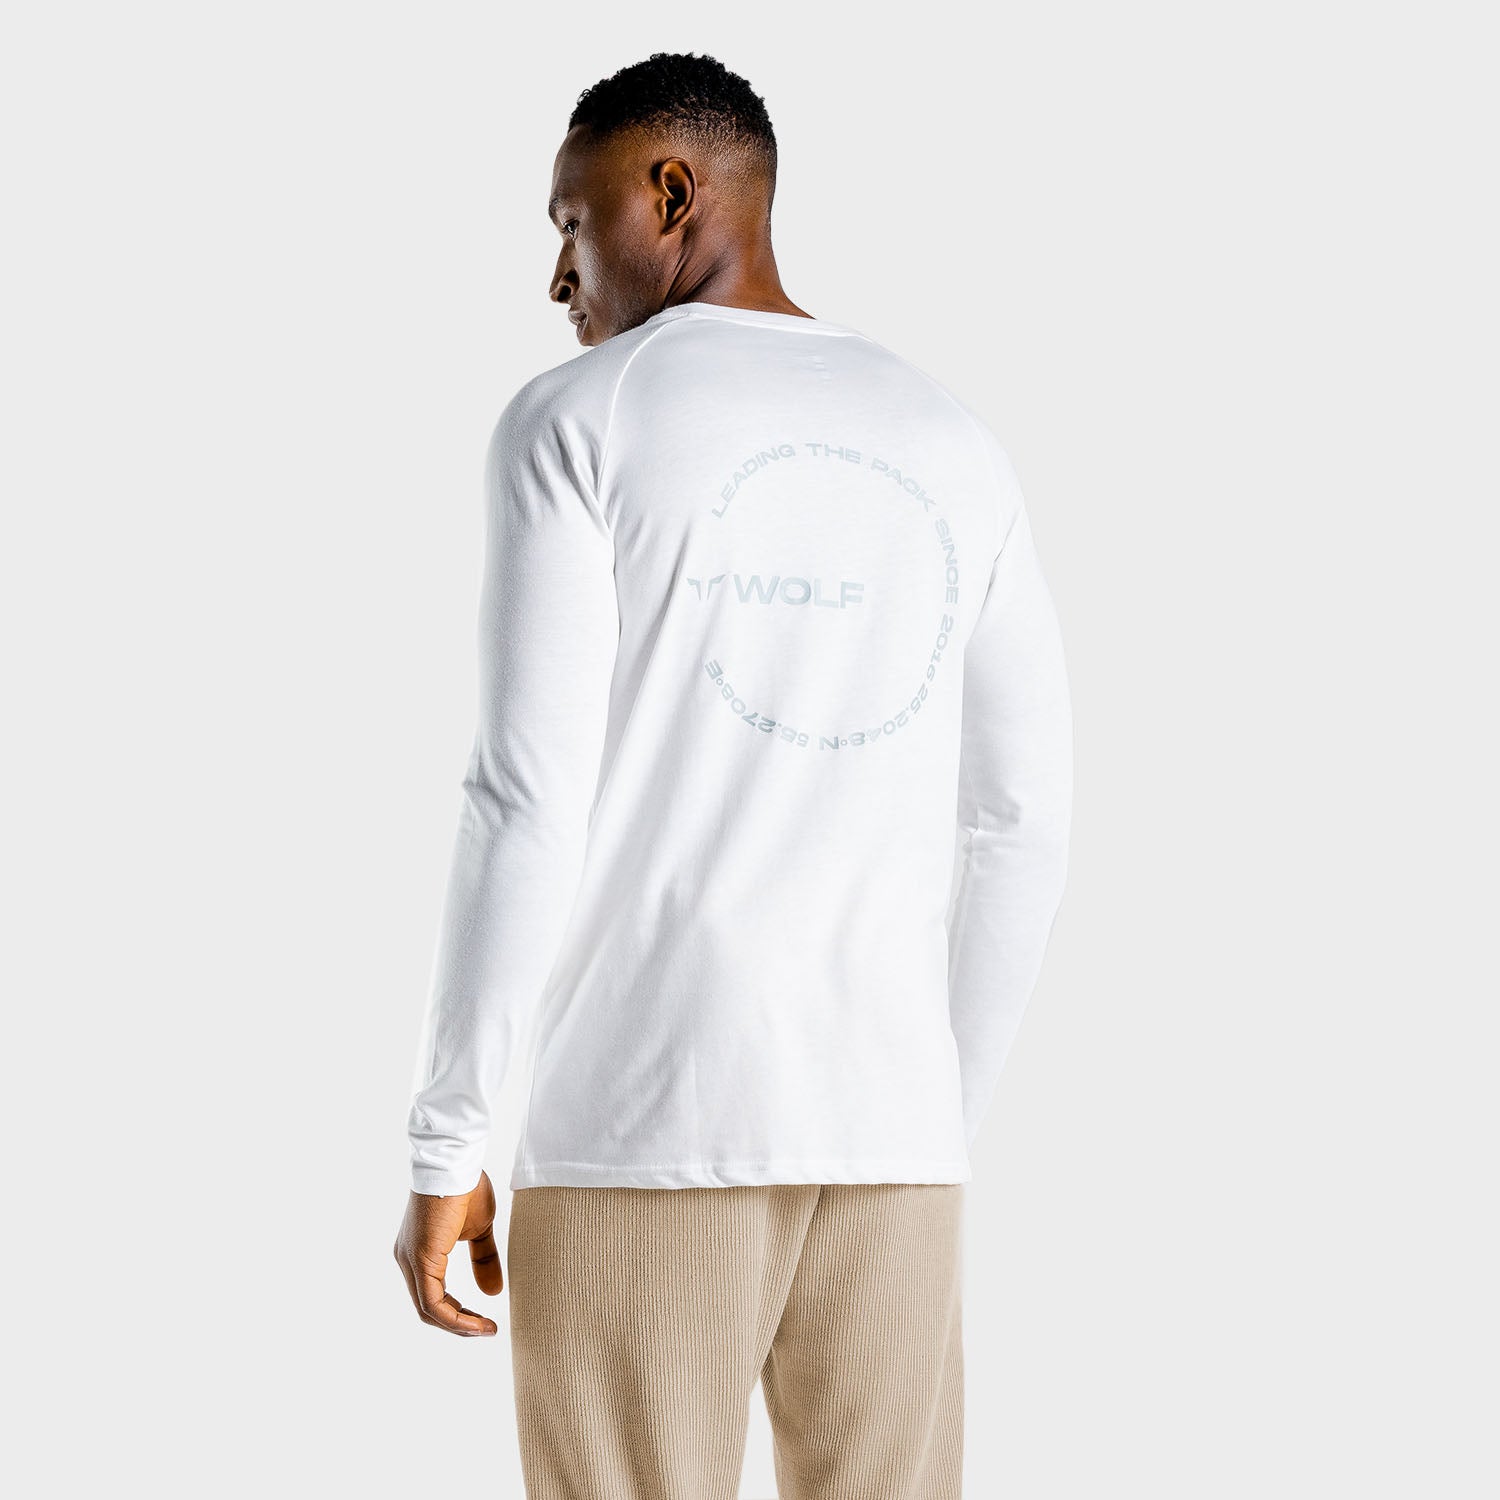 squatwolf-workout-shirts-for-men-luxe-long-sleeves-tee-white-gym-wear